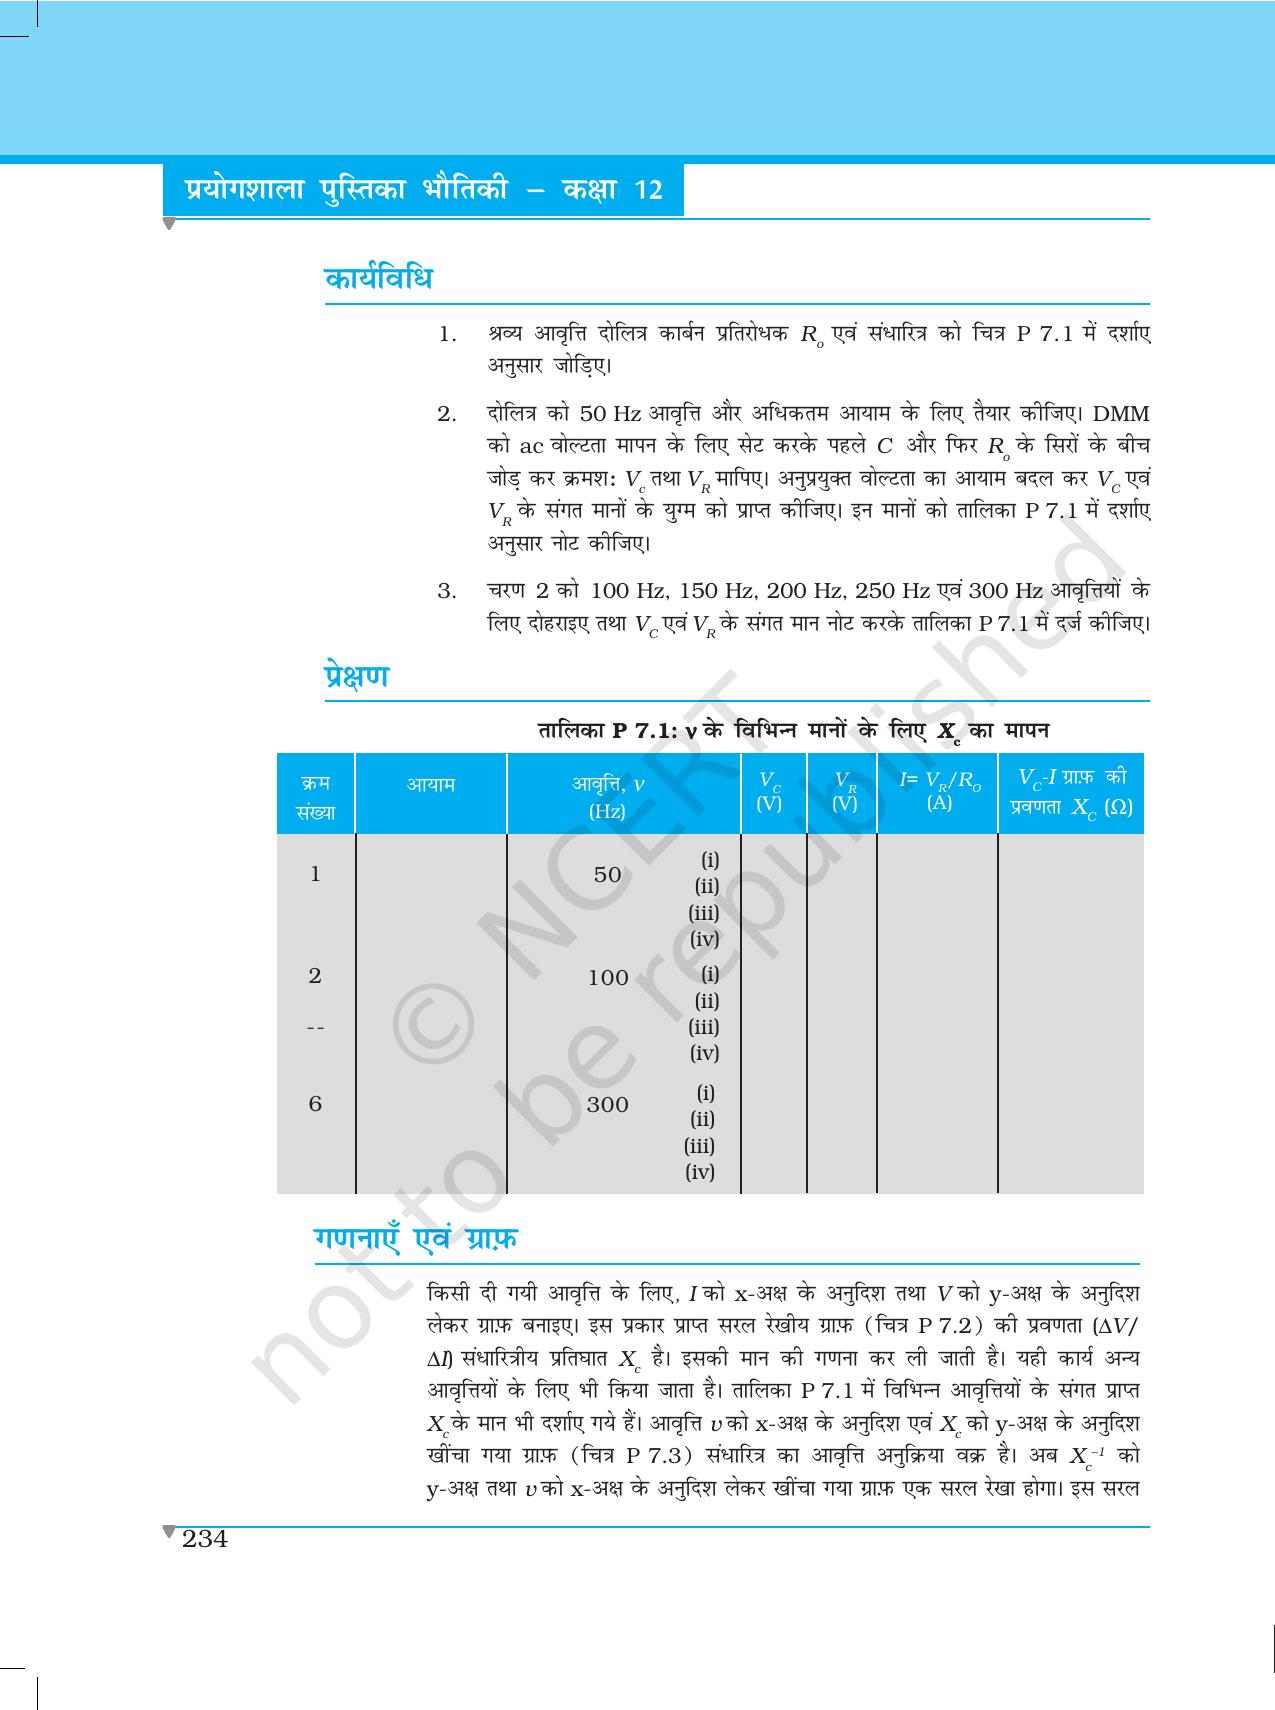 NCERT Laboratory Manuals for Class XII भौतिकी - परियोजना (1 - 7) - Page 28